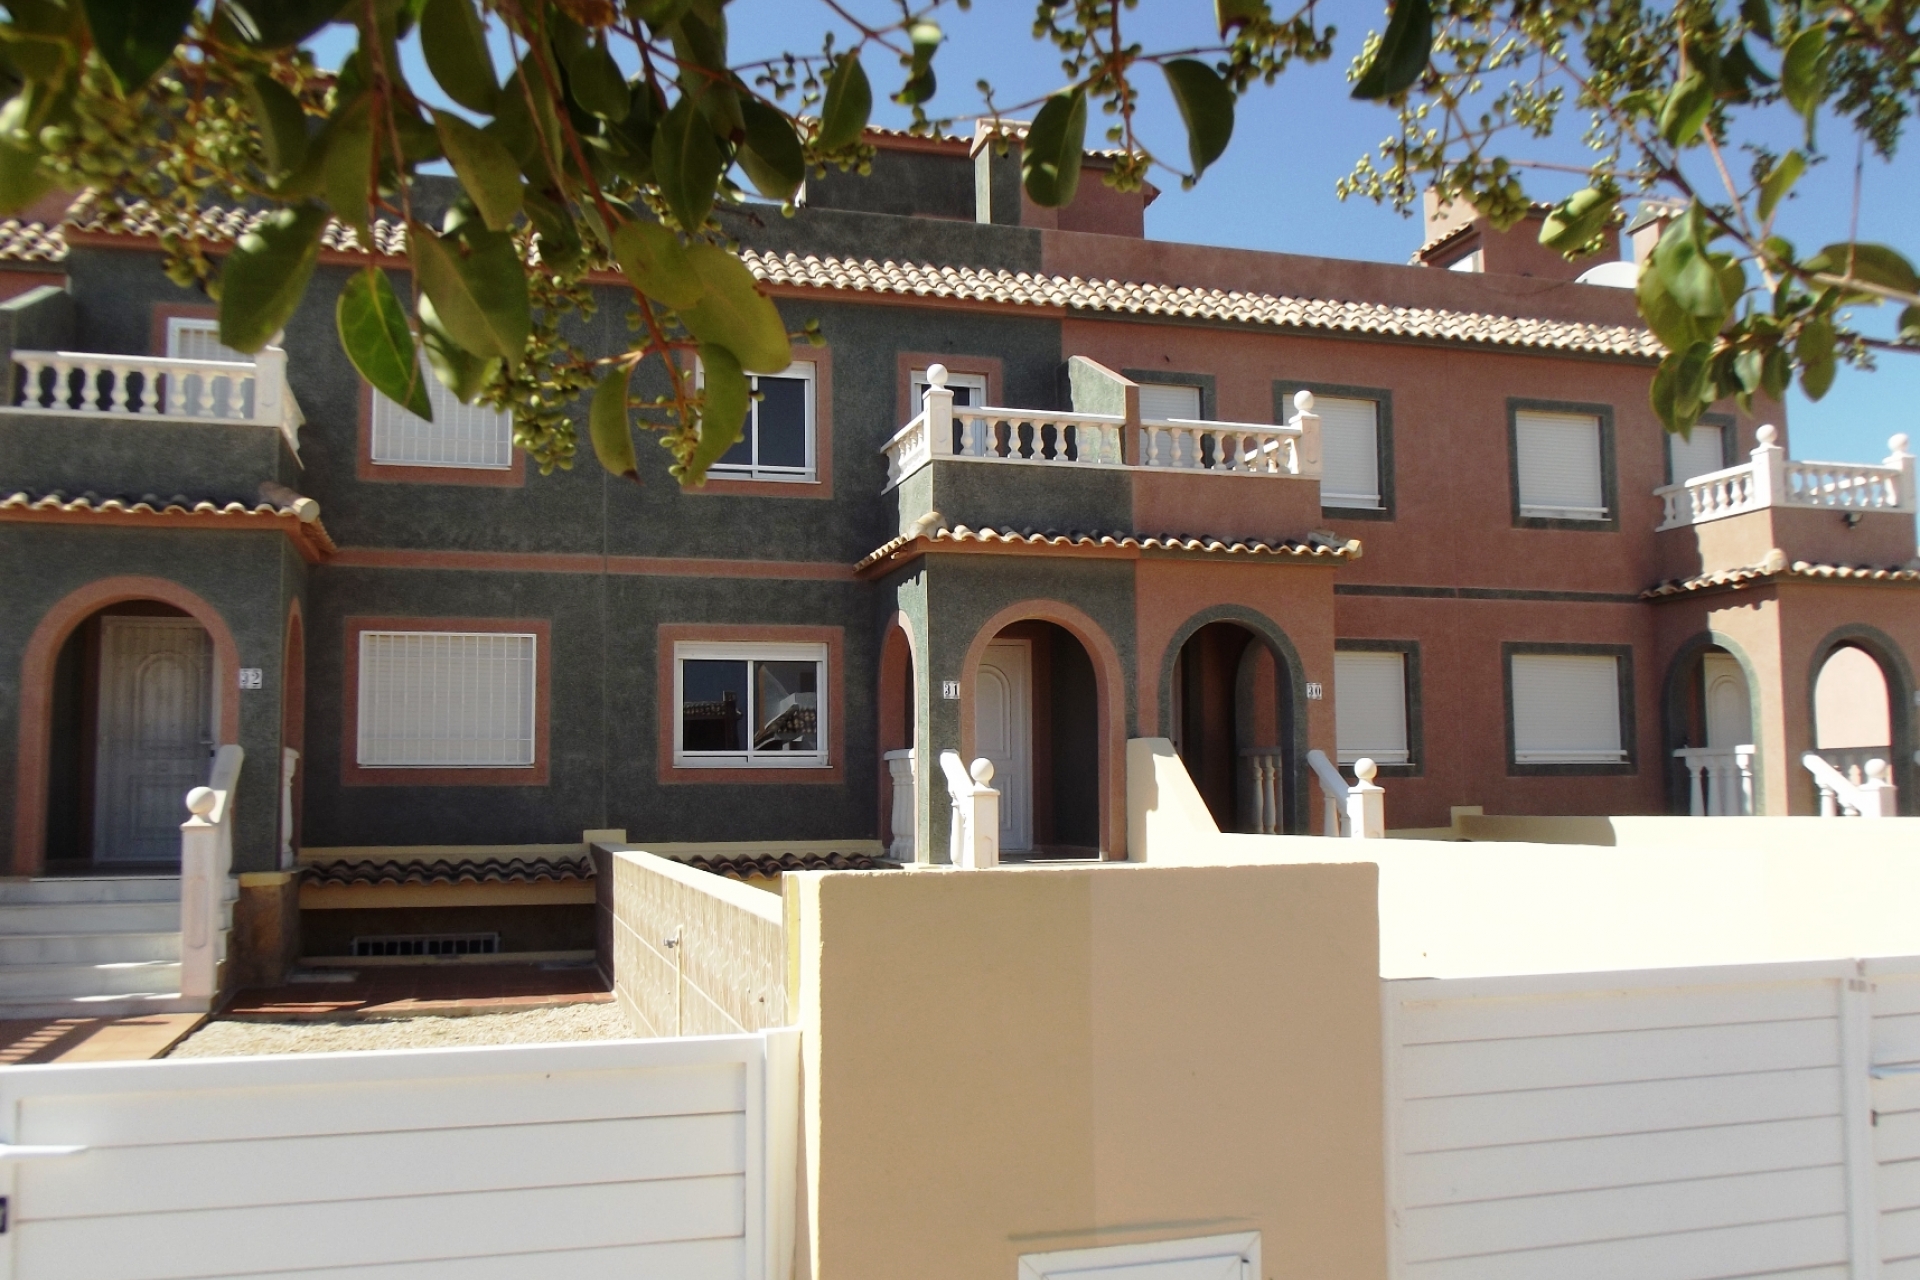 Property Sold - Townhouse for sale - Balsicas - Sierra Golf